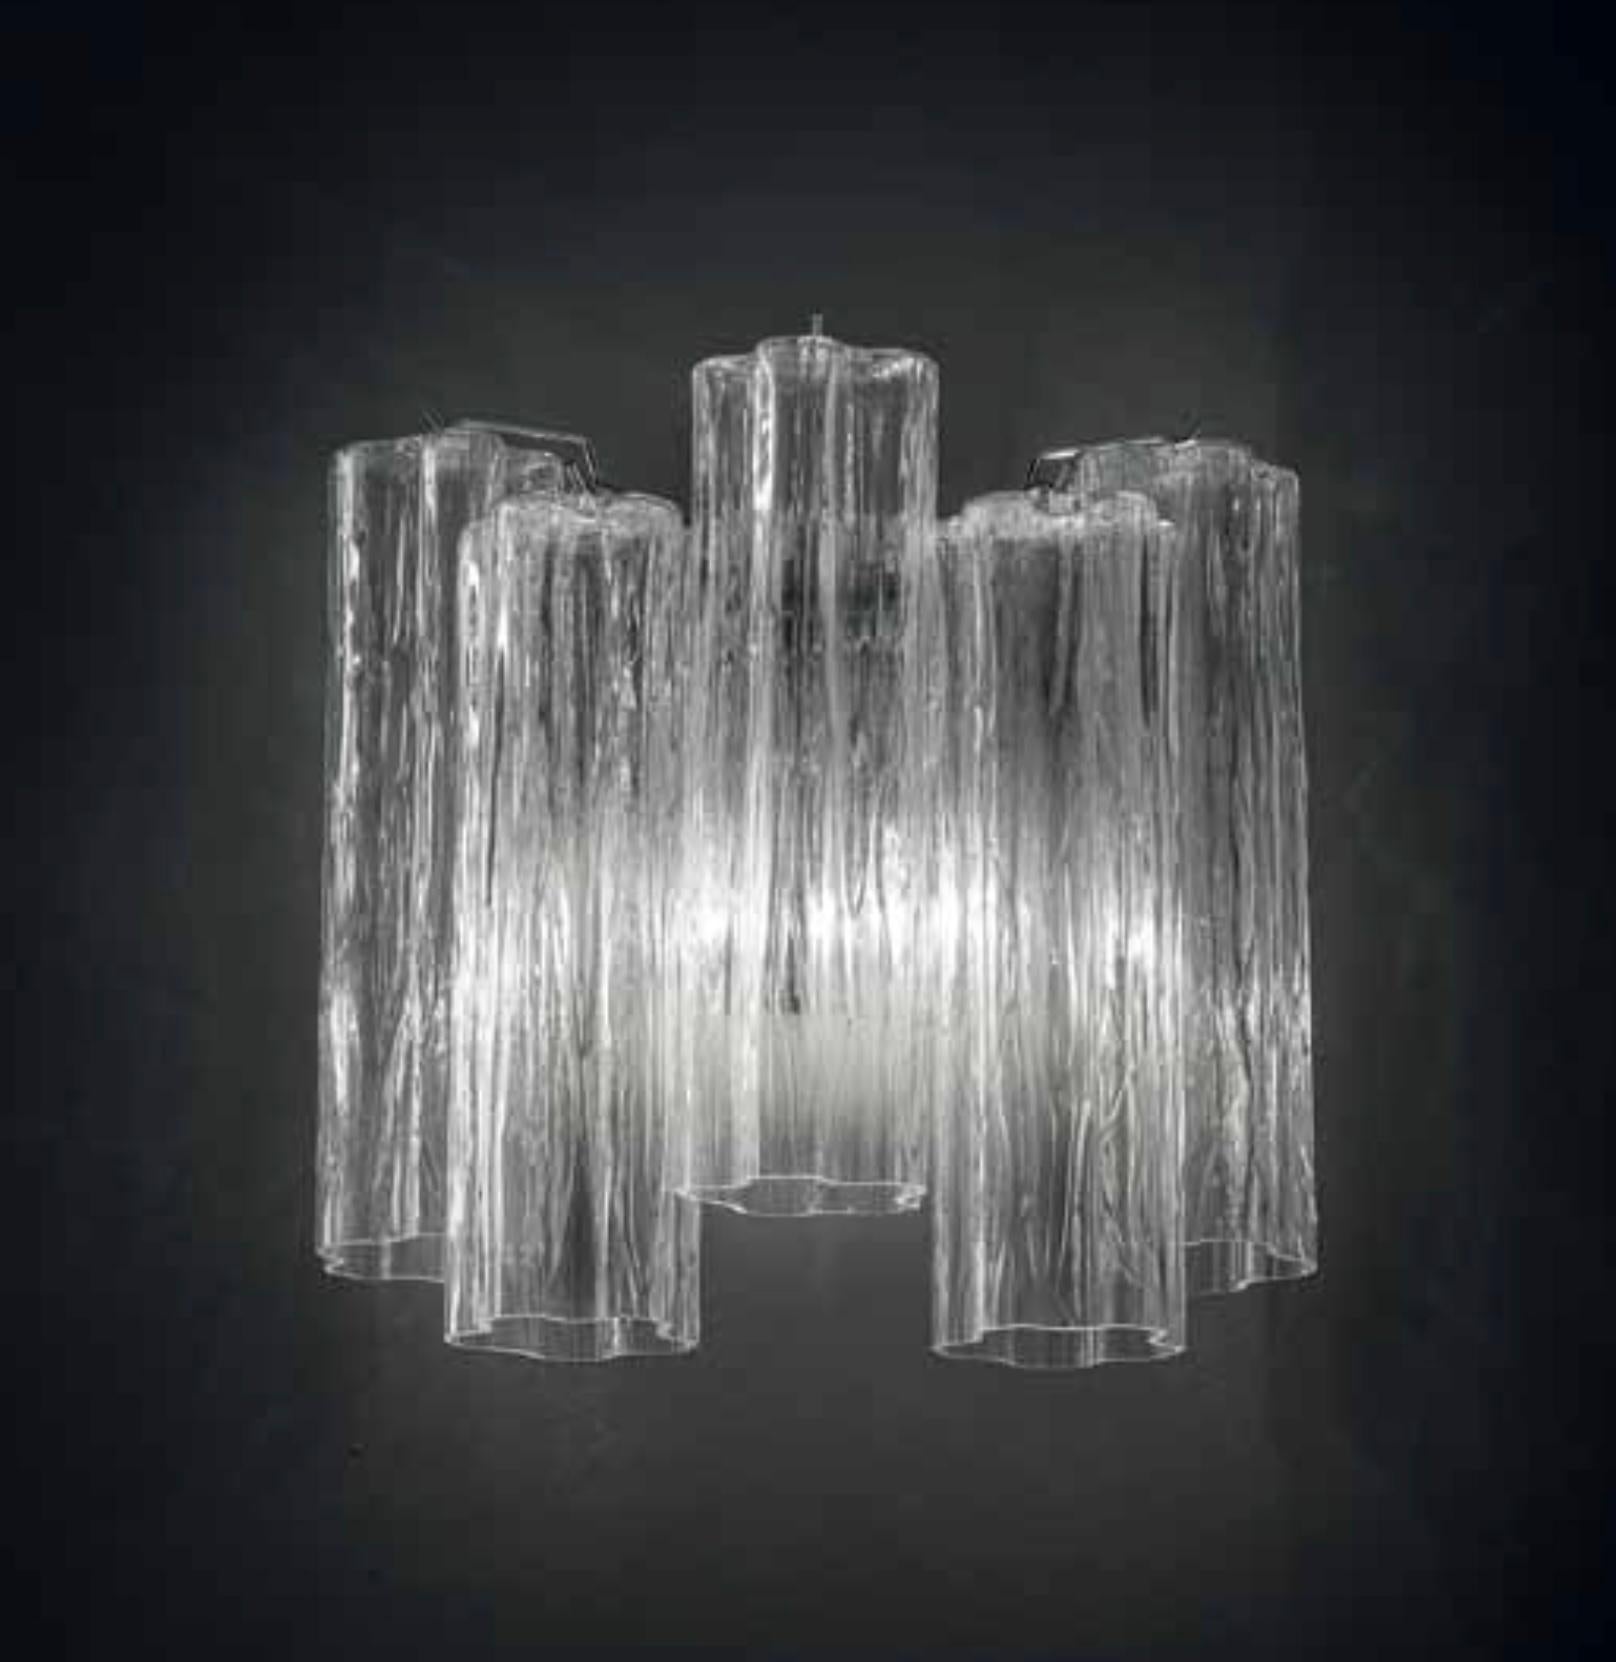 Italian wall light with clear Murano tronchi glasses of length 25cm, mounted on chrome finish metal frame / Made in Italy by Fabio Ltd
Measures: width 12 inches, height 12 inches, depth 6 inches
2 lights, E12 or E14 type, max 40W each
Order only /